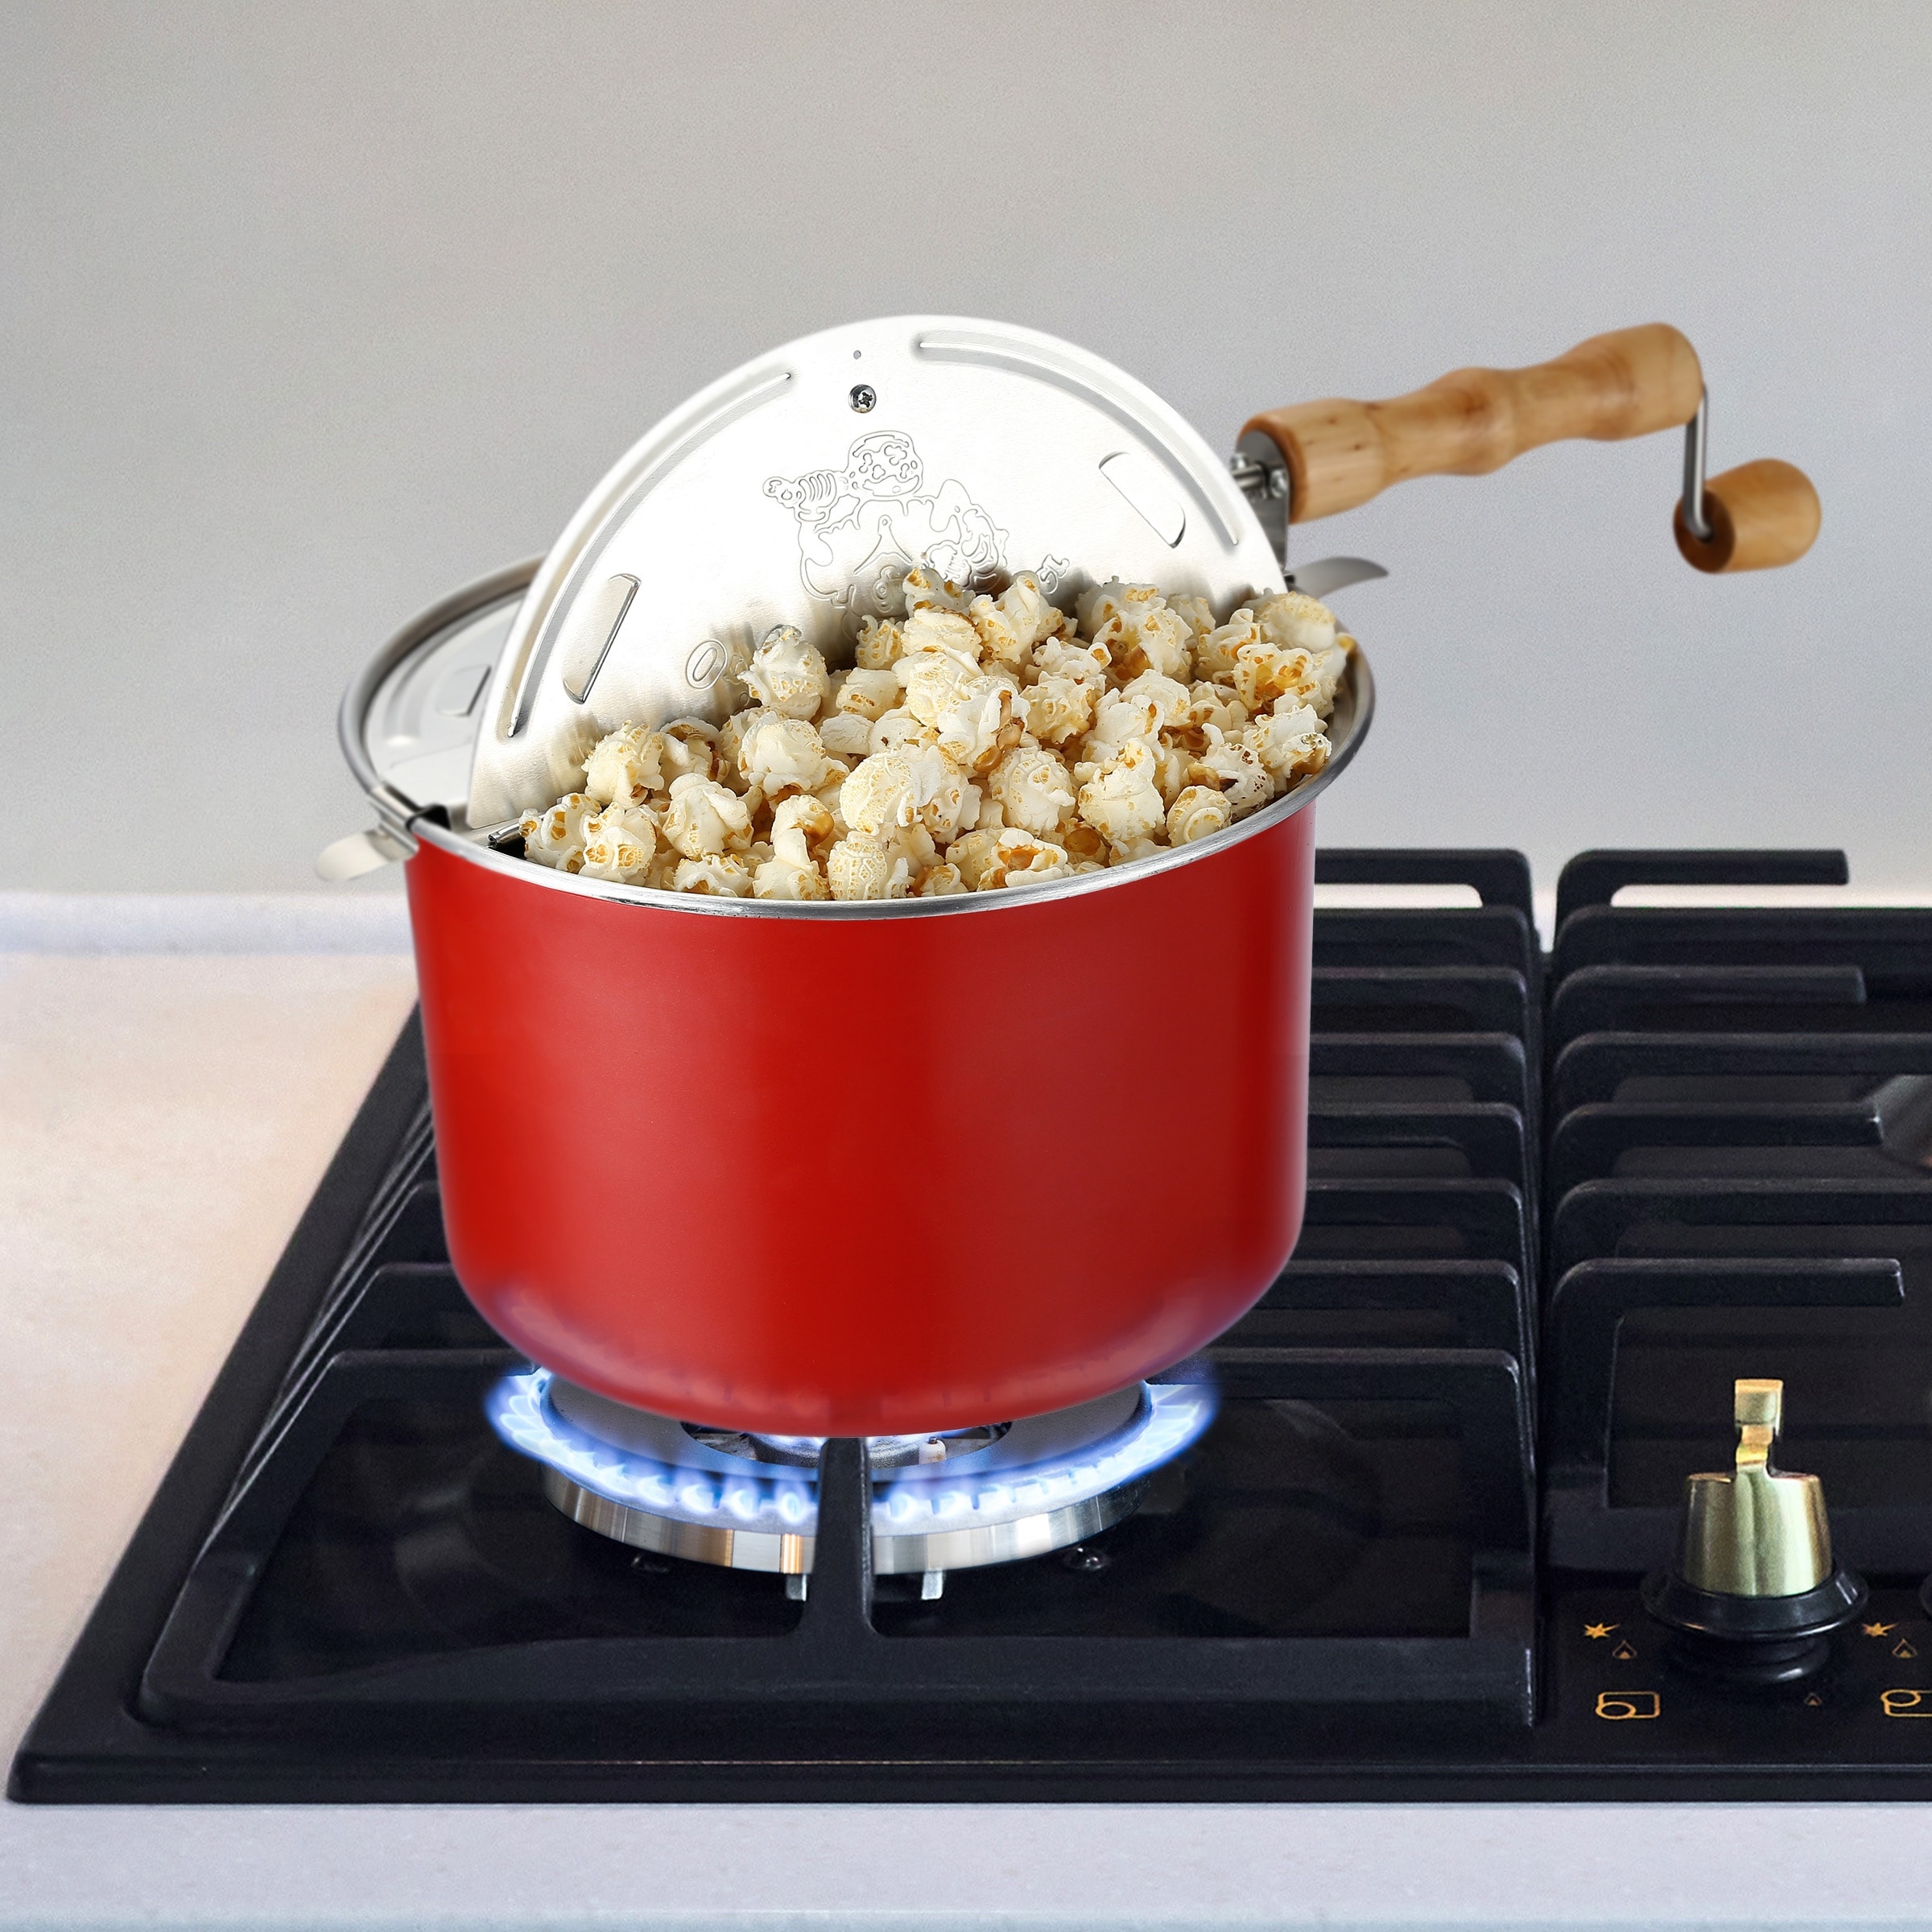 https://ak1.ostkcdn.com/images/products/is/images/direct/2279342b414f02a206ab8afa7e489efd281fcc9f/6.5-Quart-Stovetop-Popcorn-Maker-by-Great-Northern-Popcorn-%28Red%29.jpg